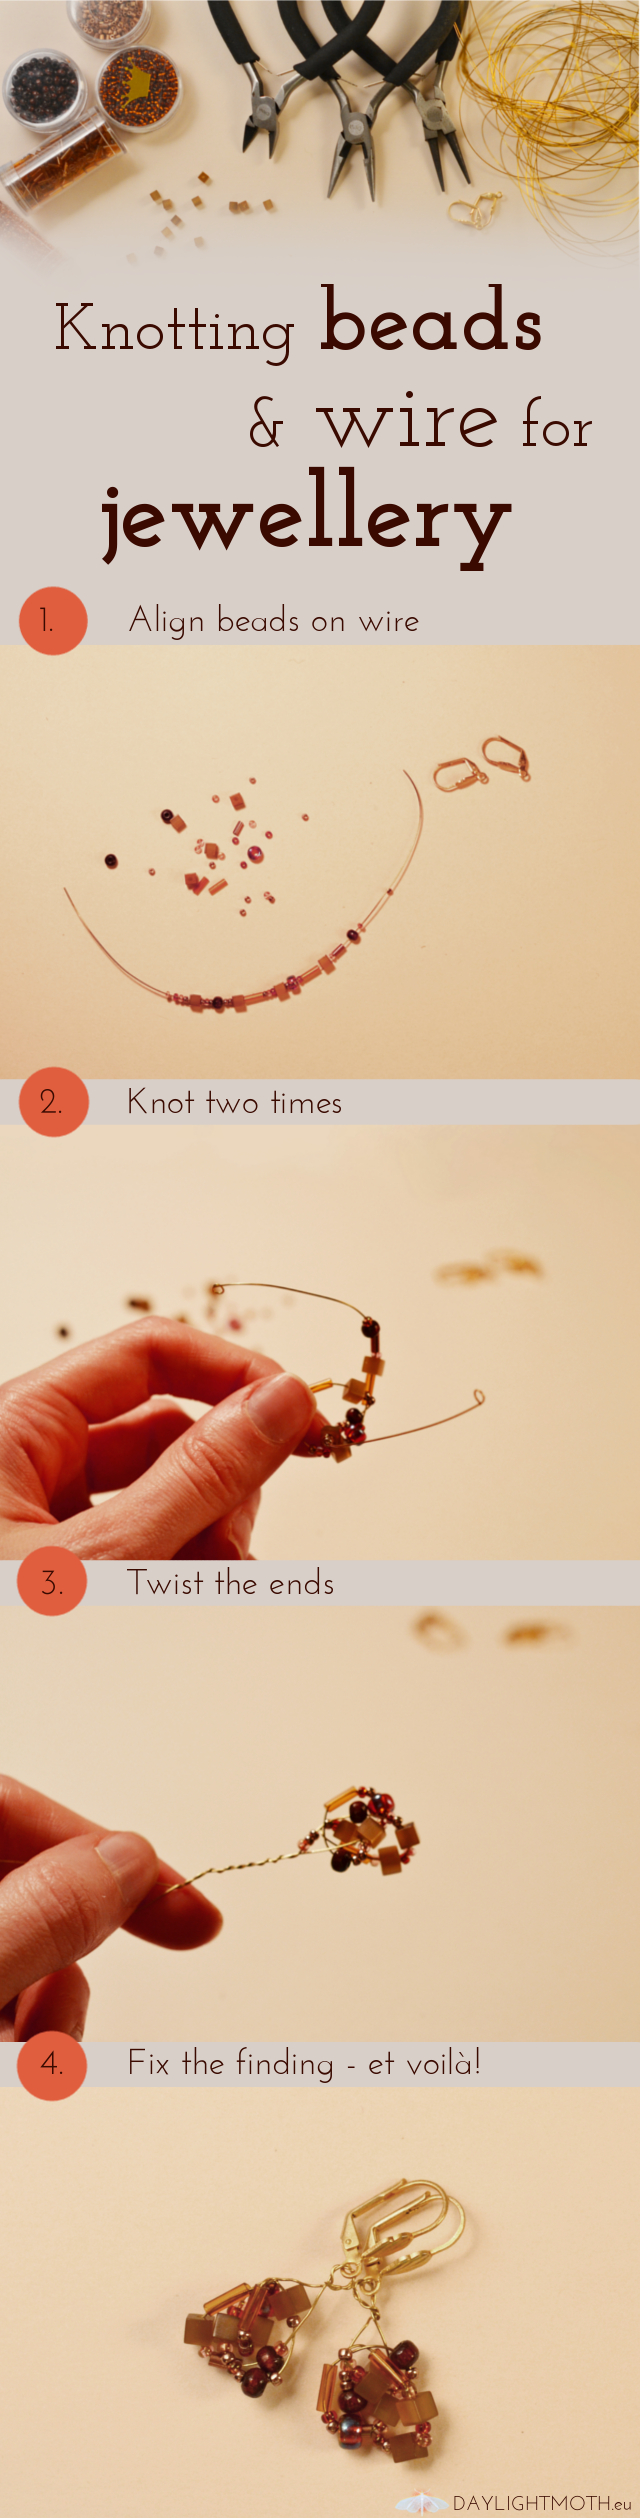 This is a ste-by-step guide on how to make earrings from beads and wire. You only have to line up a batch of beads on wire and form two knots. Secure it and your DIY earrings are finished! #infogrphic #wirejewelry